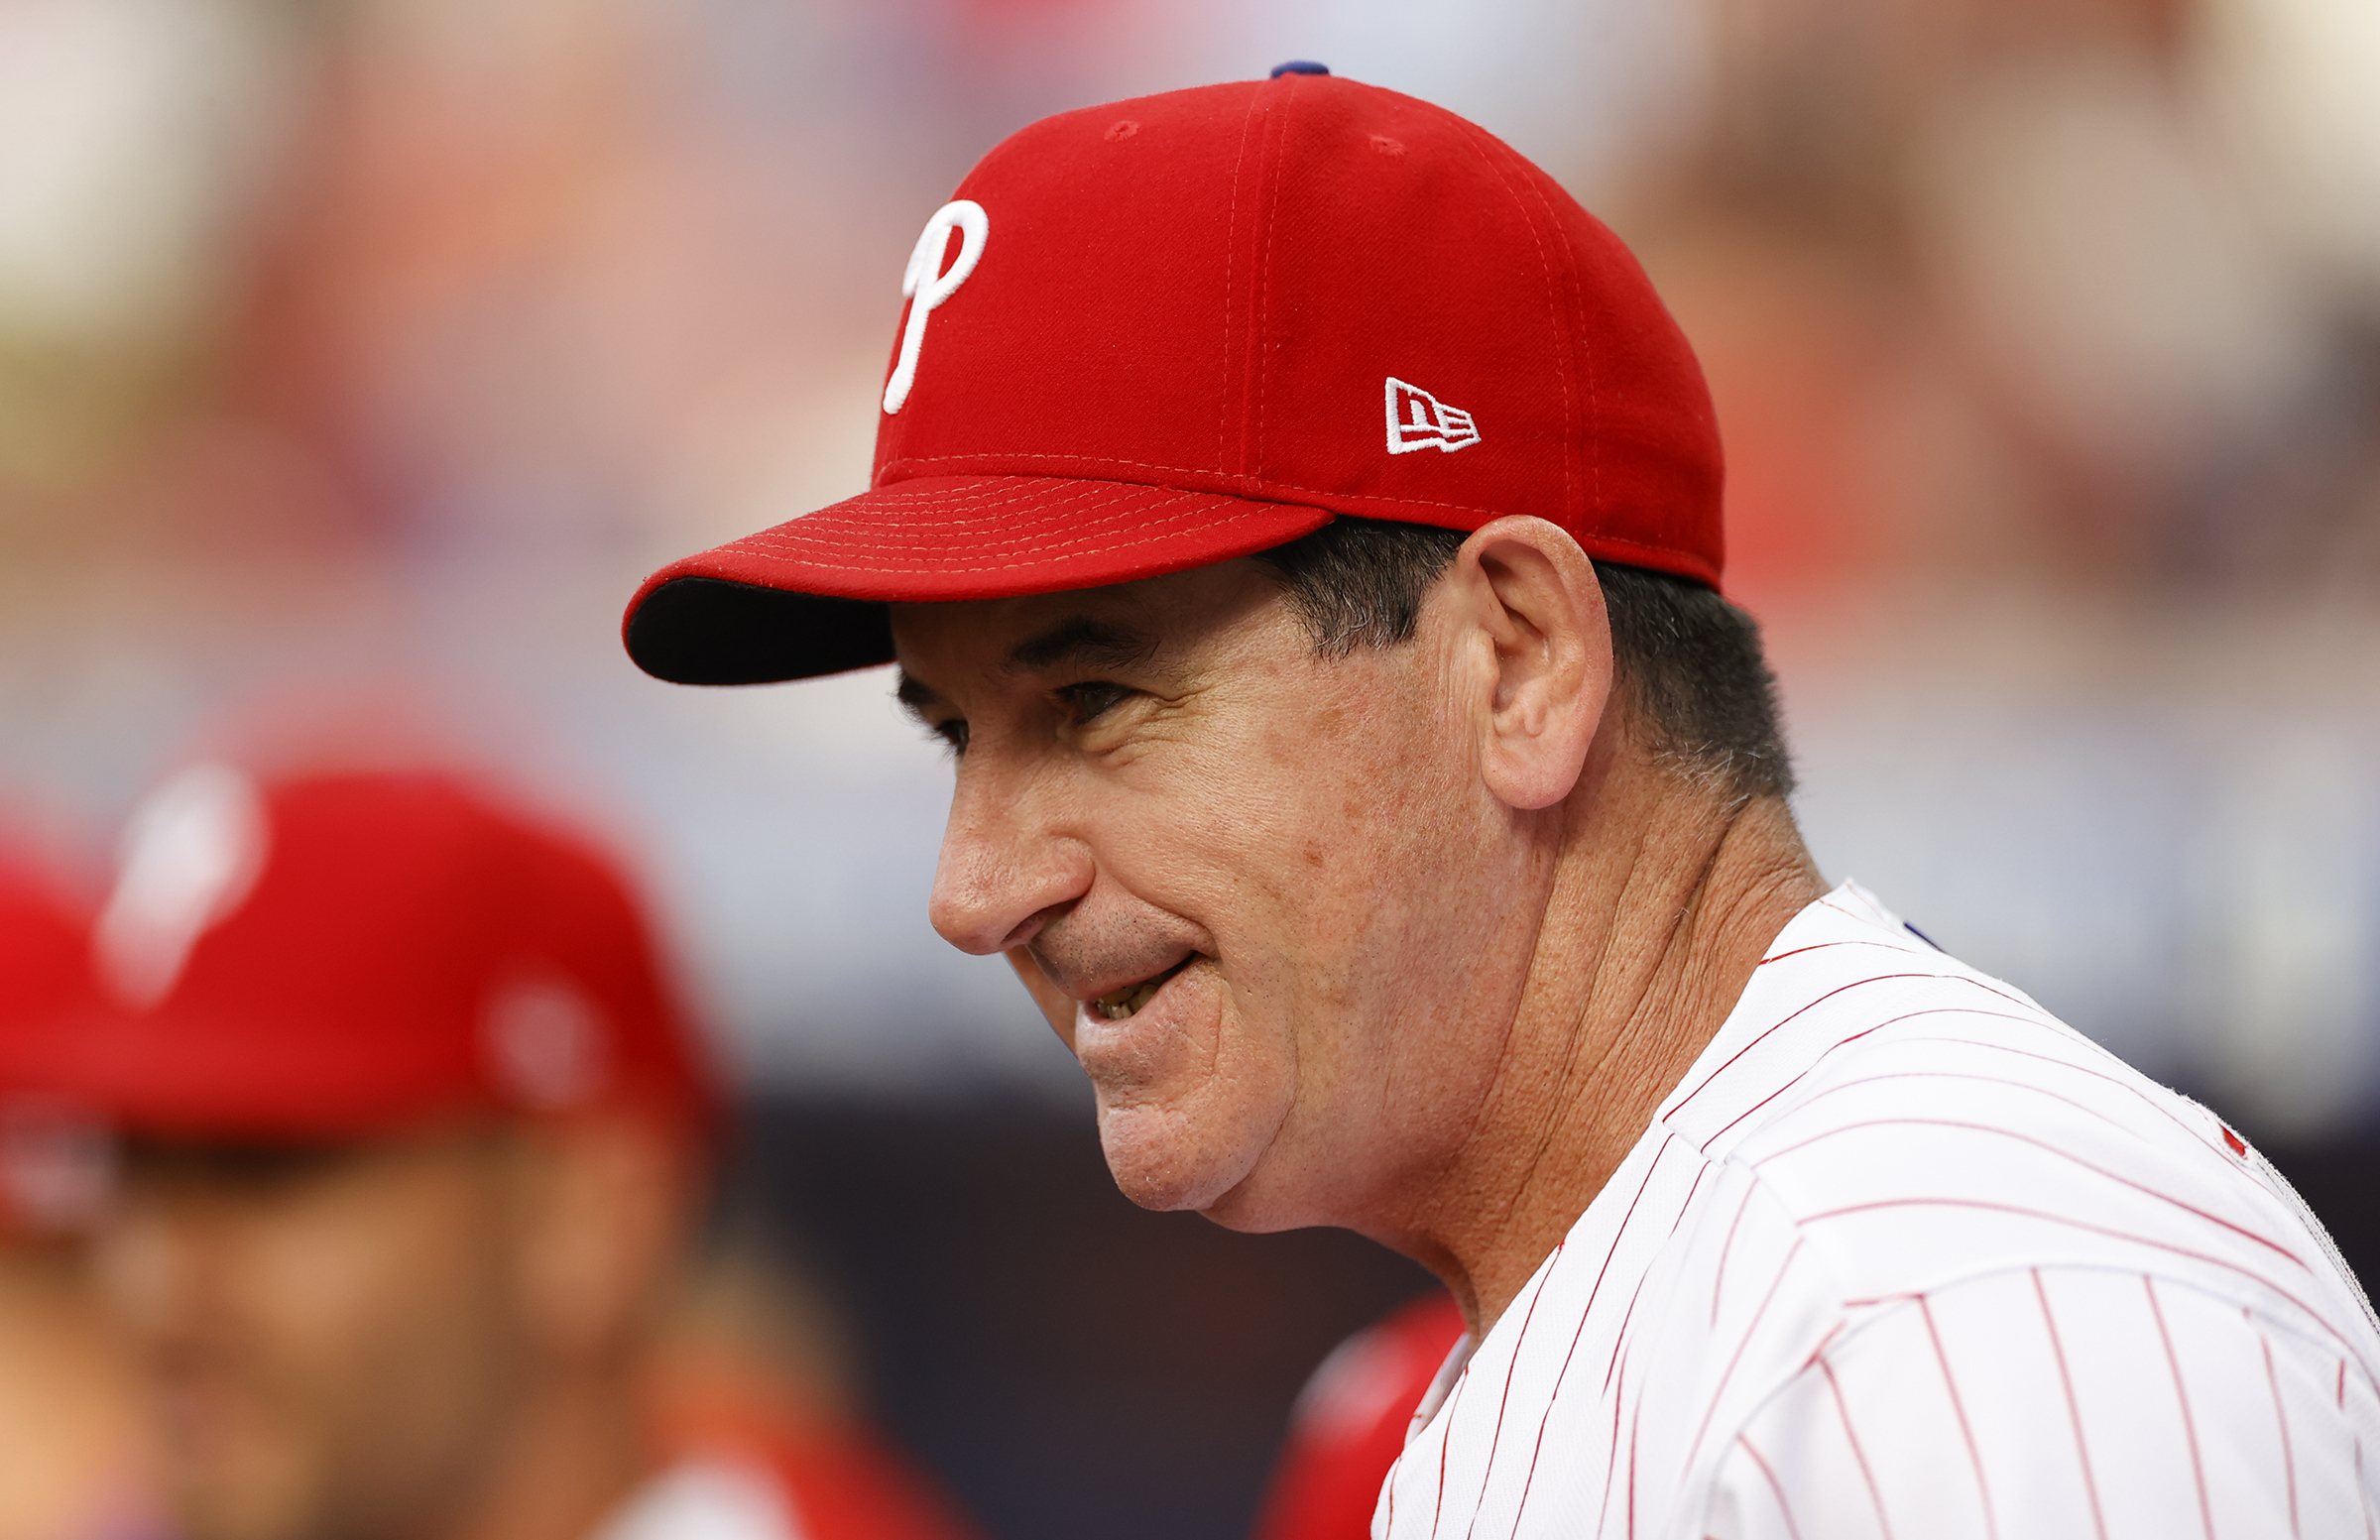 Rob Thomson has made all the difference for the Phillies, and history shows  it's a remarkable feat